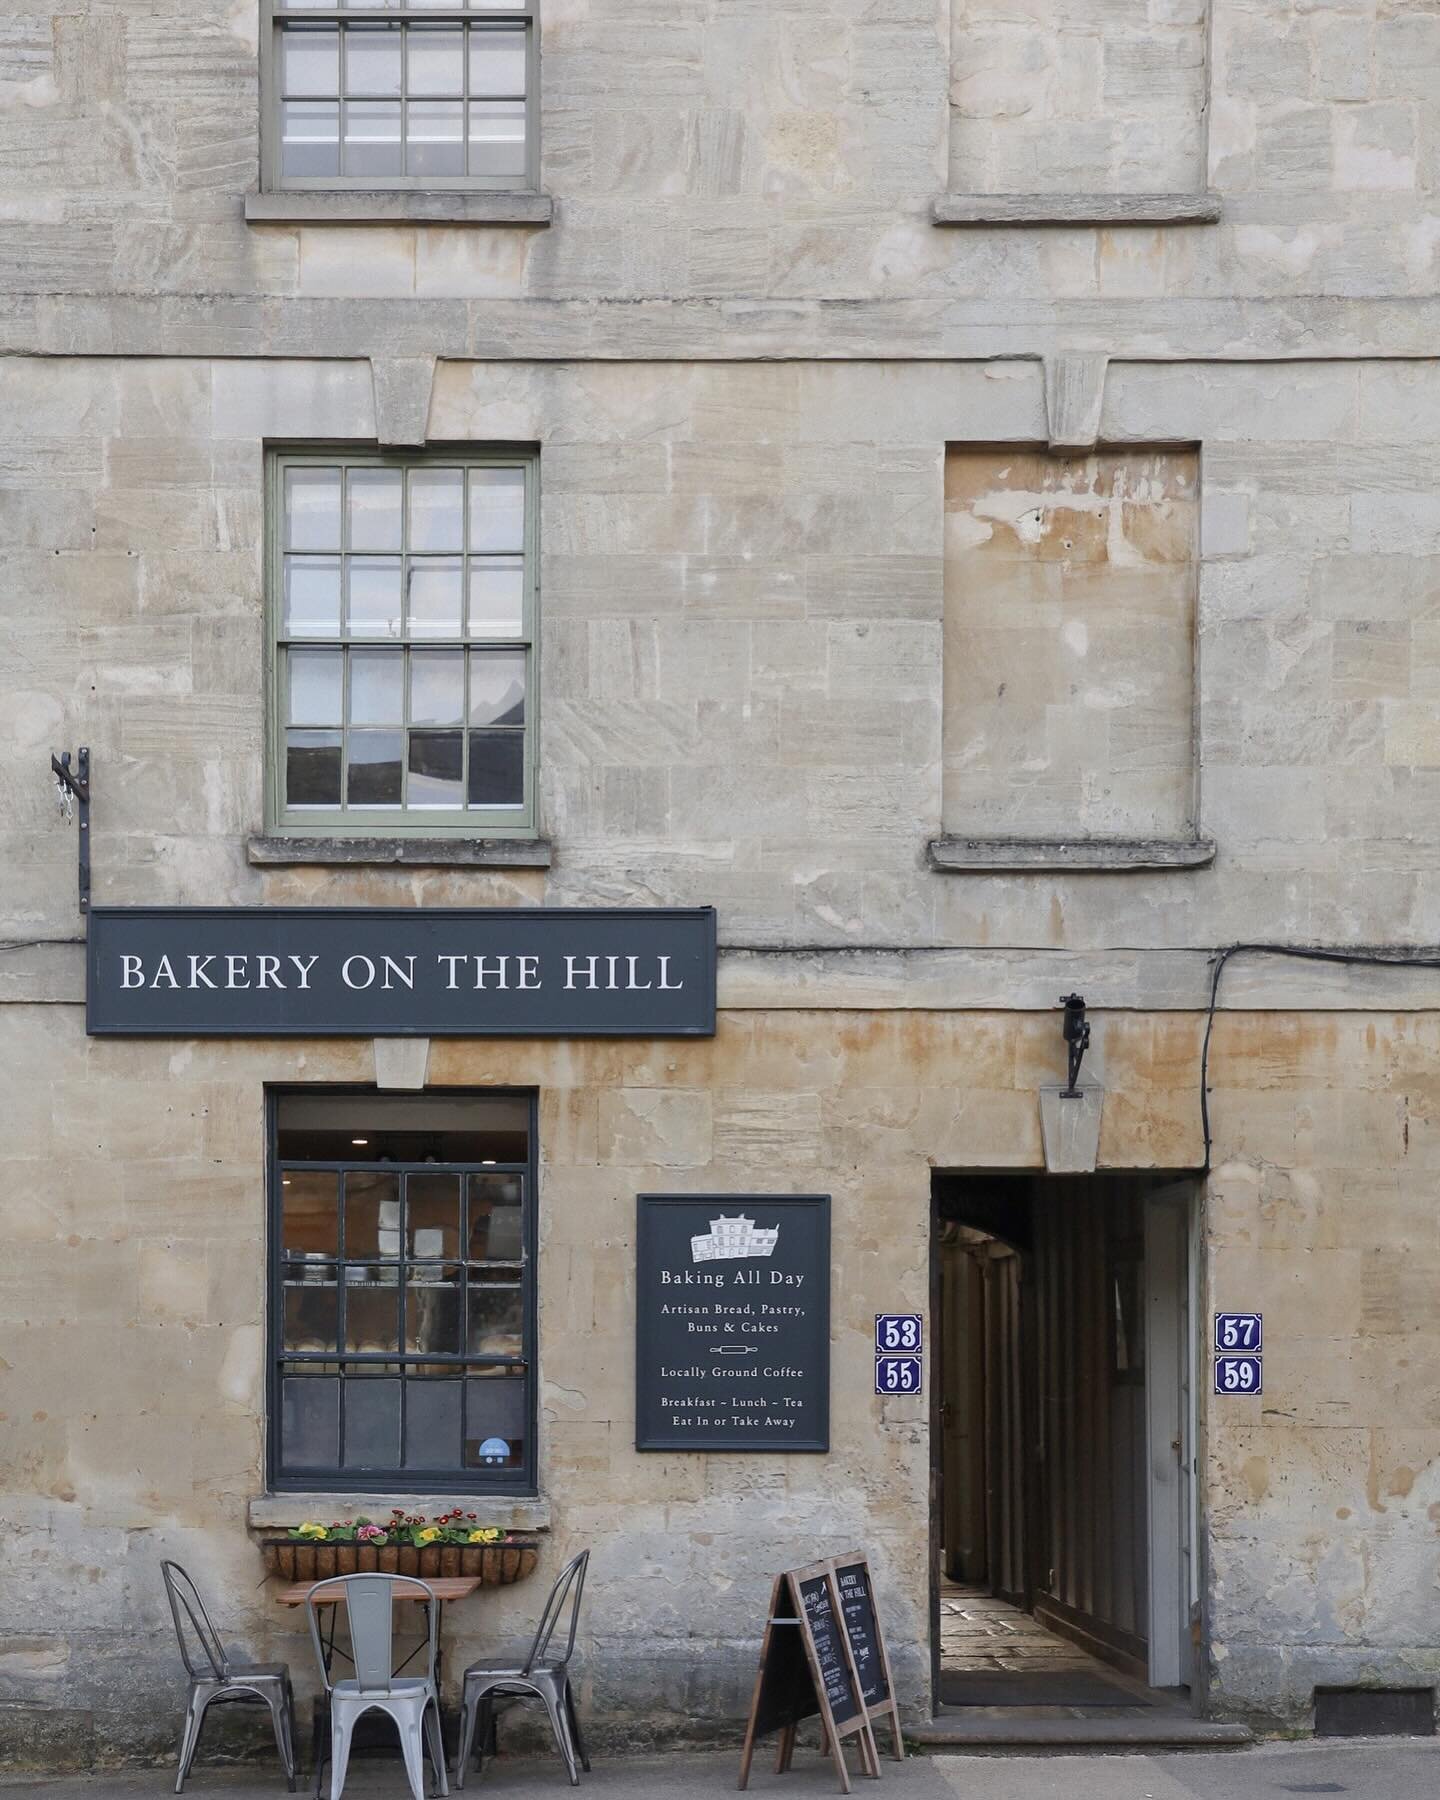 Bakery on the hill, where every day is a little sweeter. 🍰

#bakeryonthehill #bakeryonthehillburford #burfordcotswolds #burford #cotswoldslife #cotswoldsbakery #cotswolds_culture #discovercotswolds